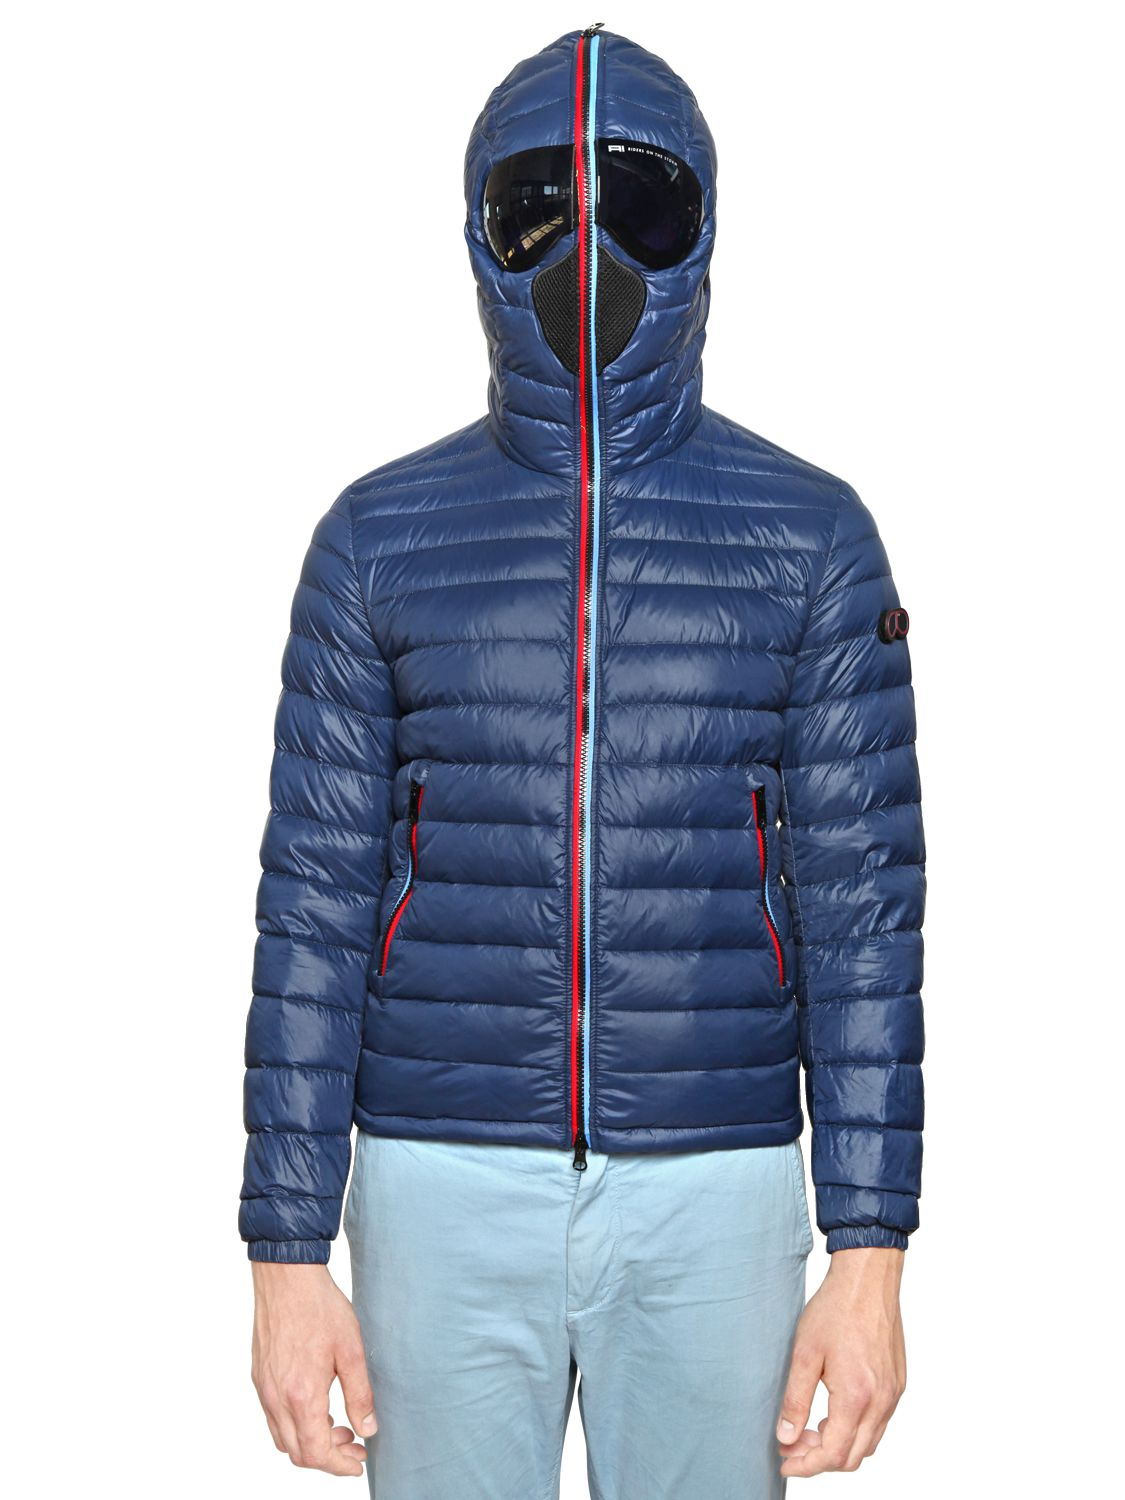 Lyst - Ai Riders On The Storm Total Zip Up Light Weight Down Jacket in ...